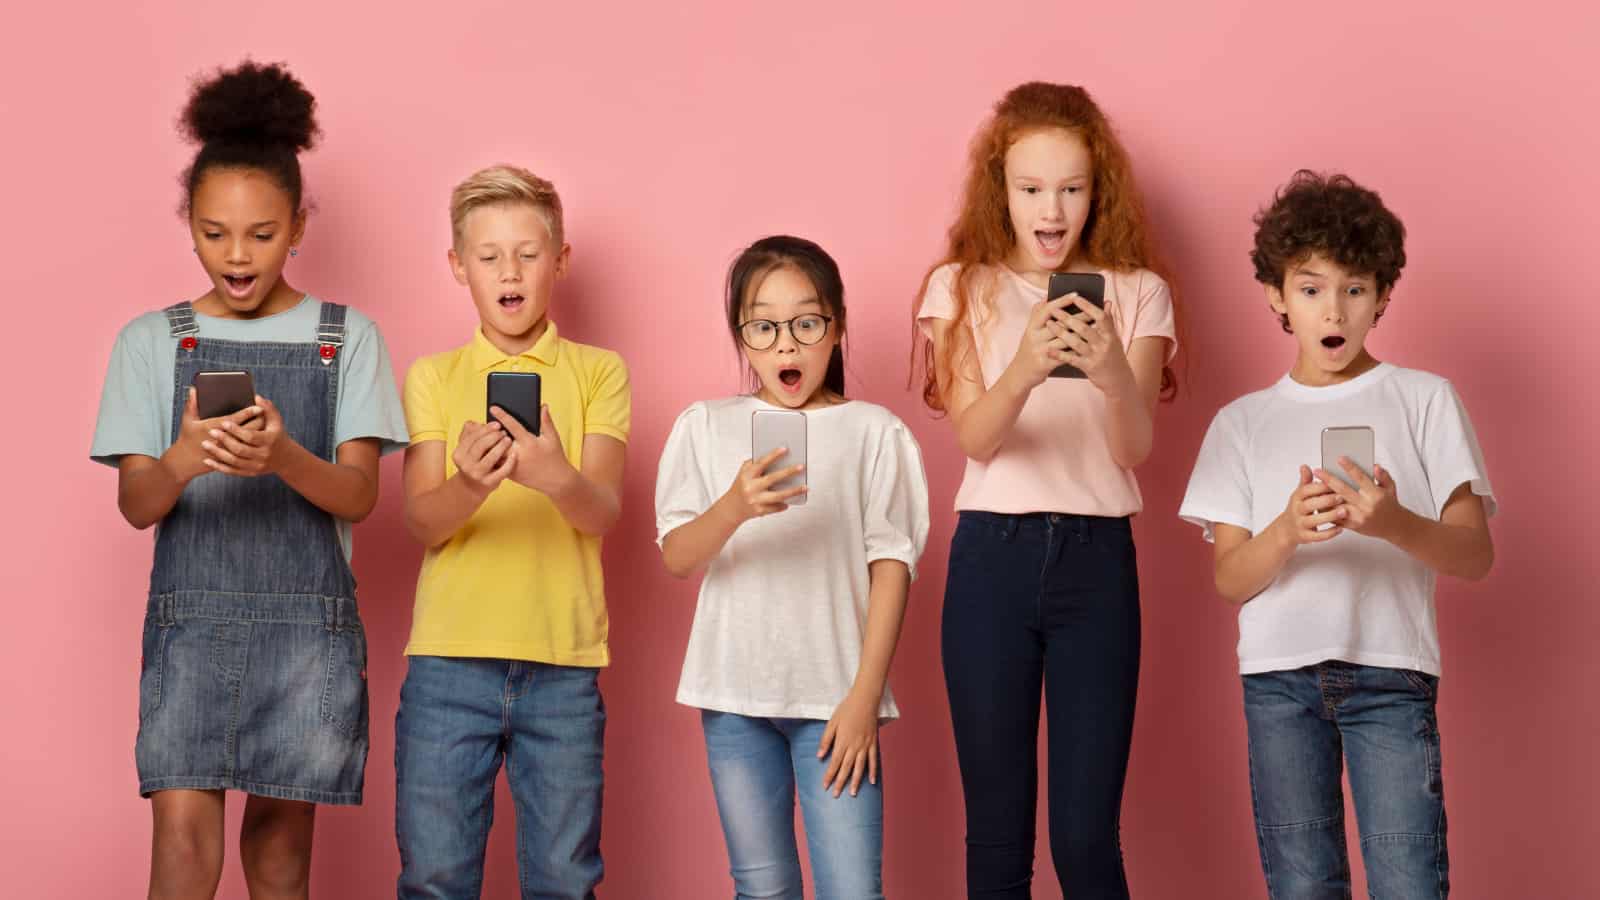 kids with phones shocked